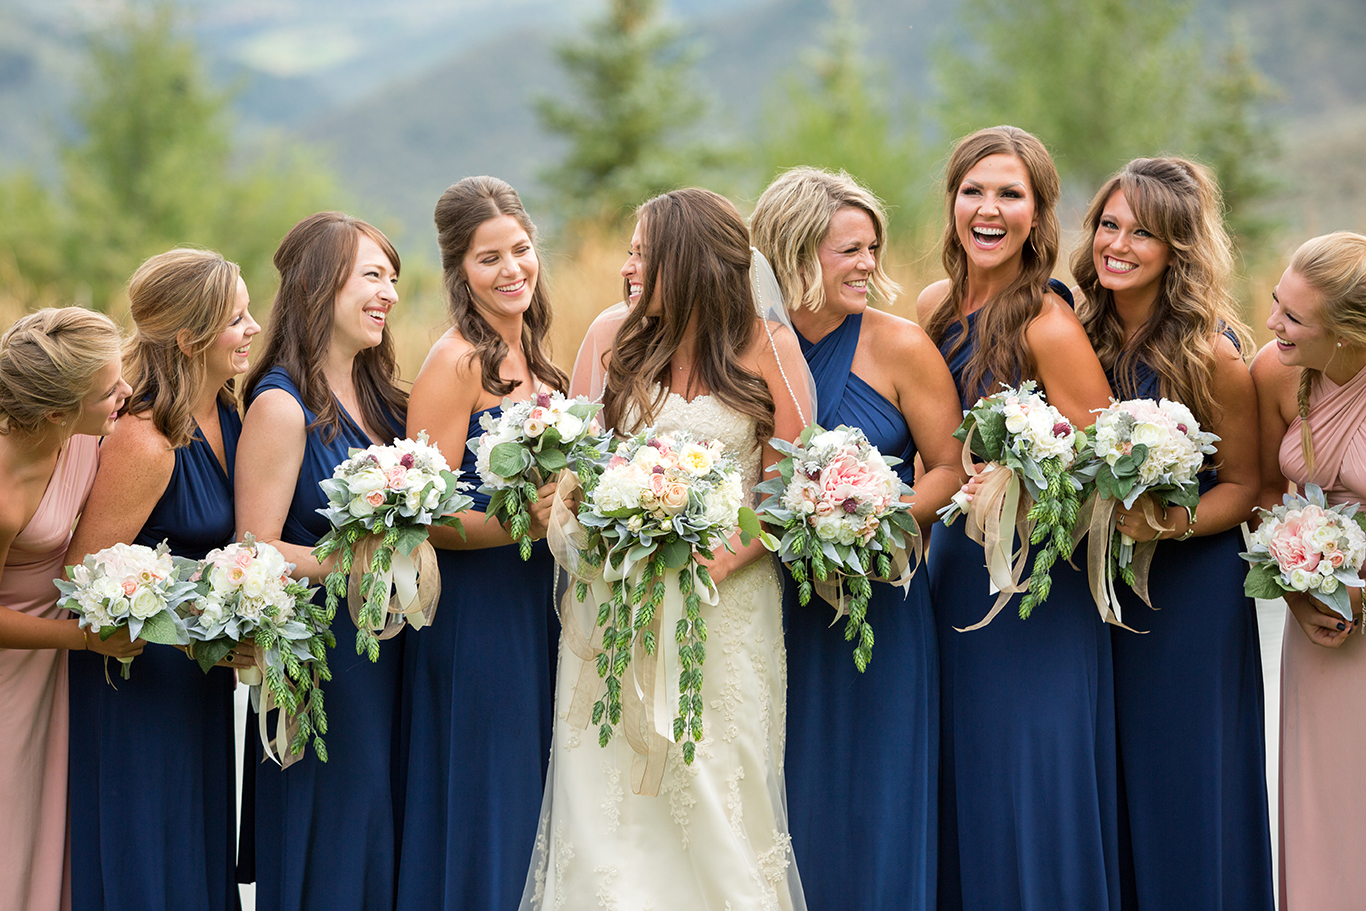 Why You Should Consider a Rocky Mountain National Park Wedding